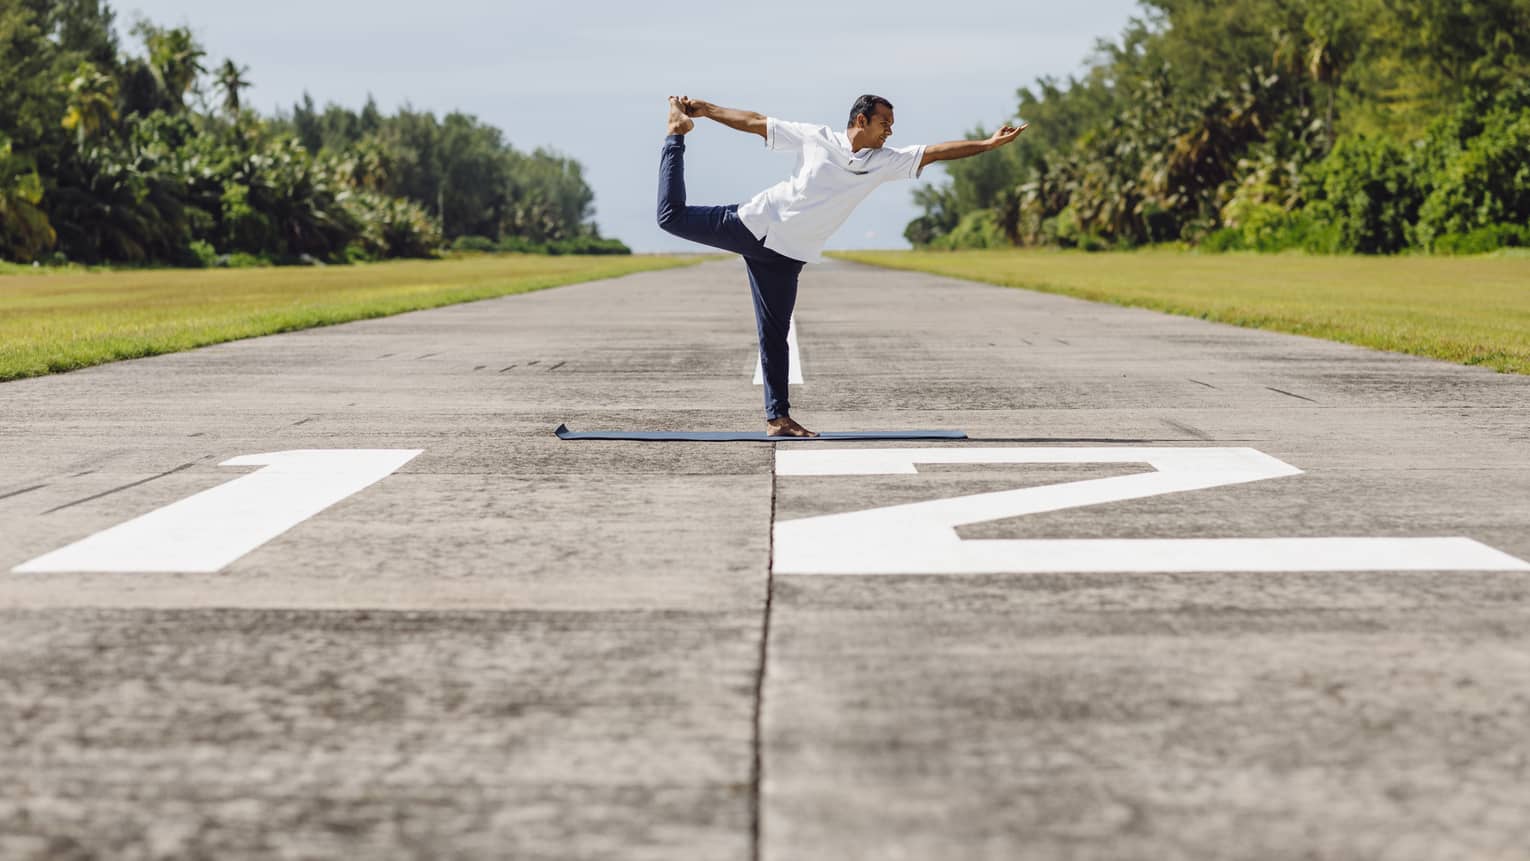 A man doing yoga – specifically ballerina pose – on an airplane runway